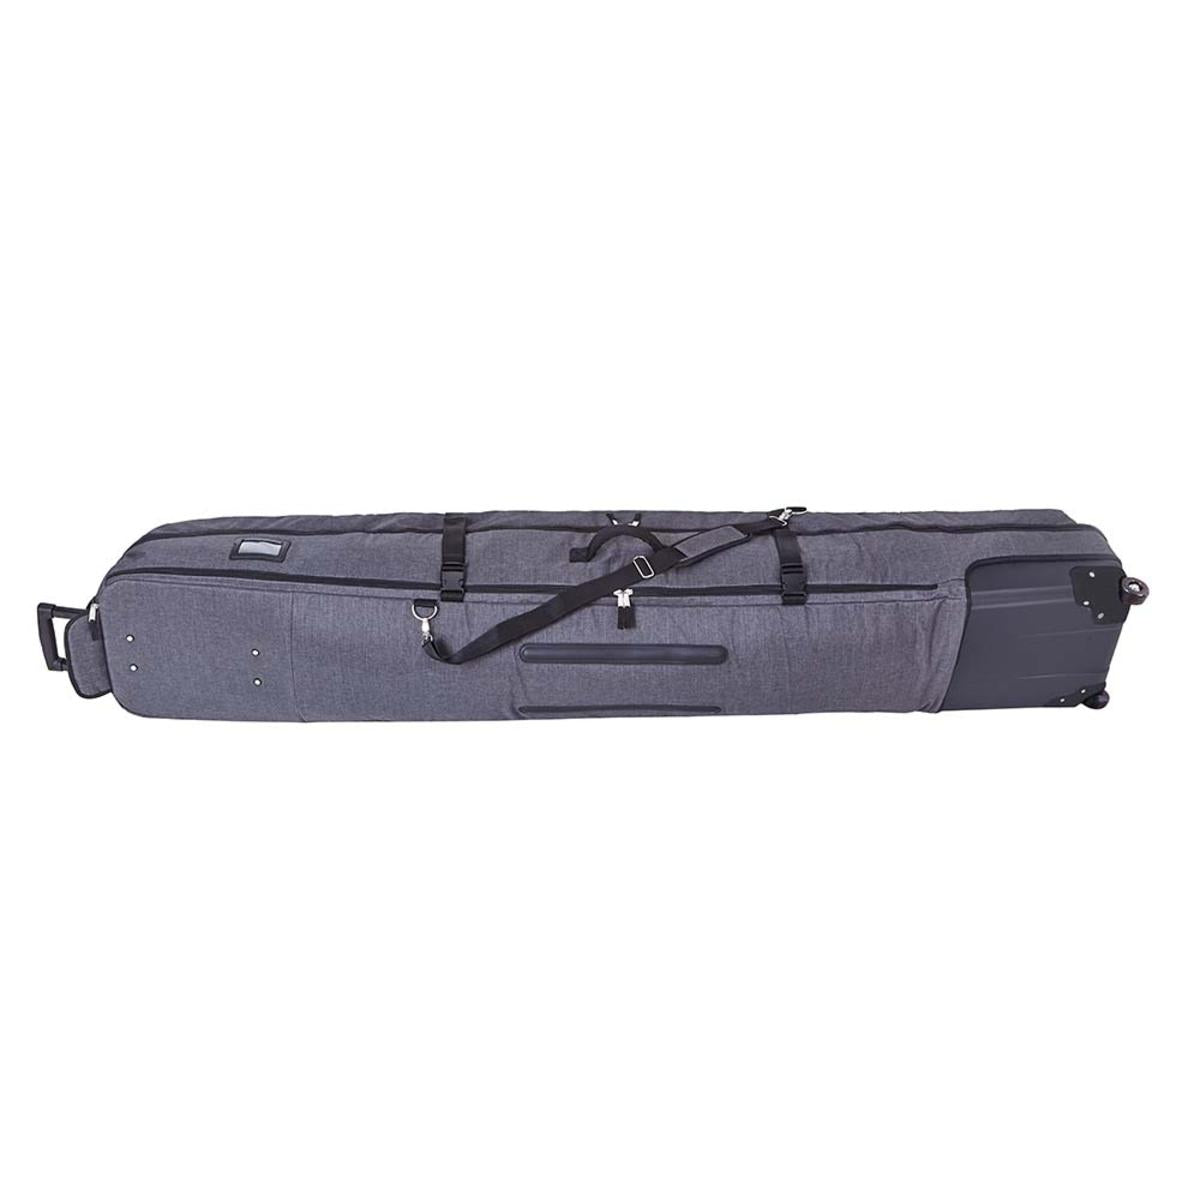 Athalon Everything Board Padded Bag - 195cm - Heather Gray